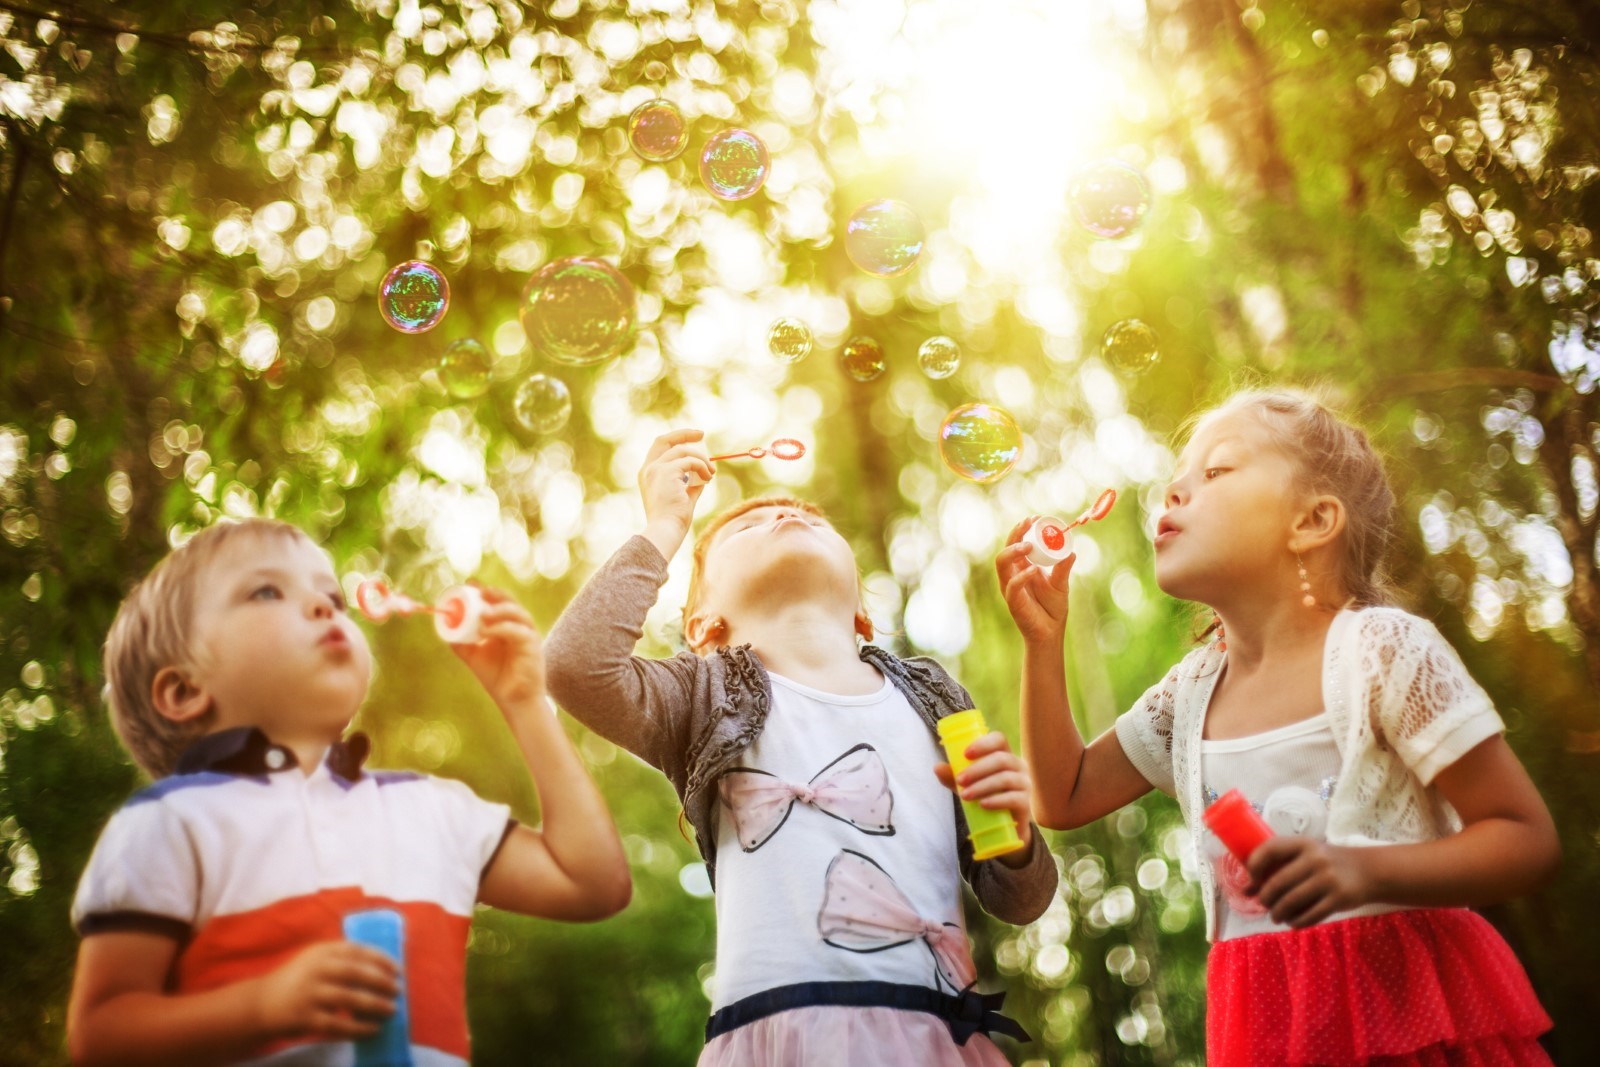 Three children engaging in outdoor play by blowing bubbles